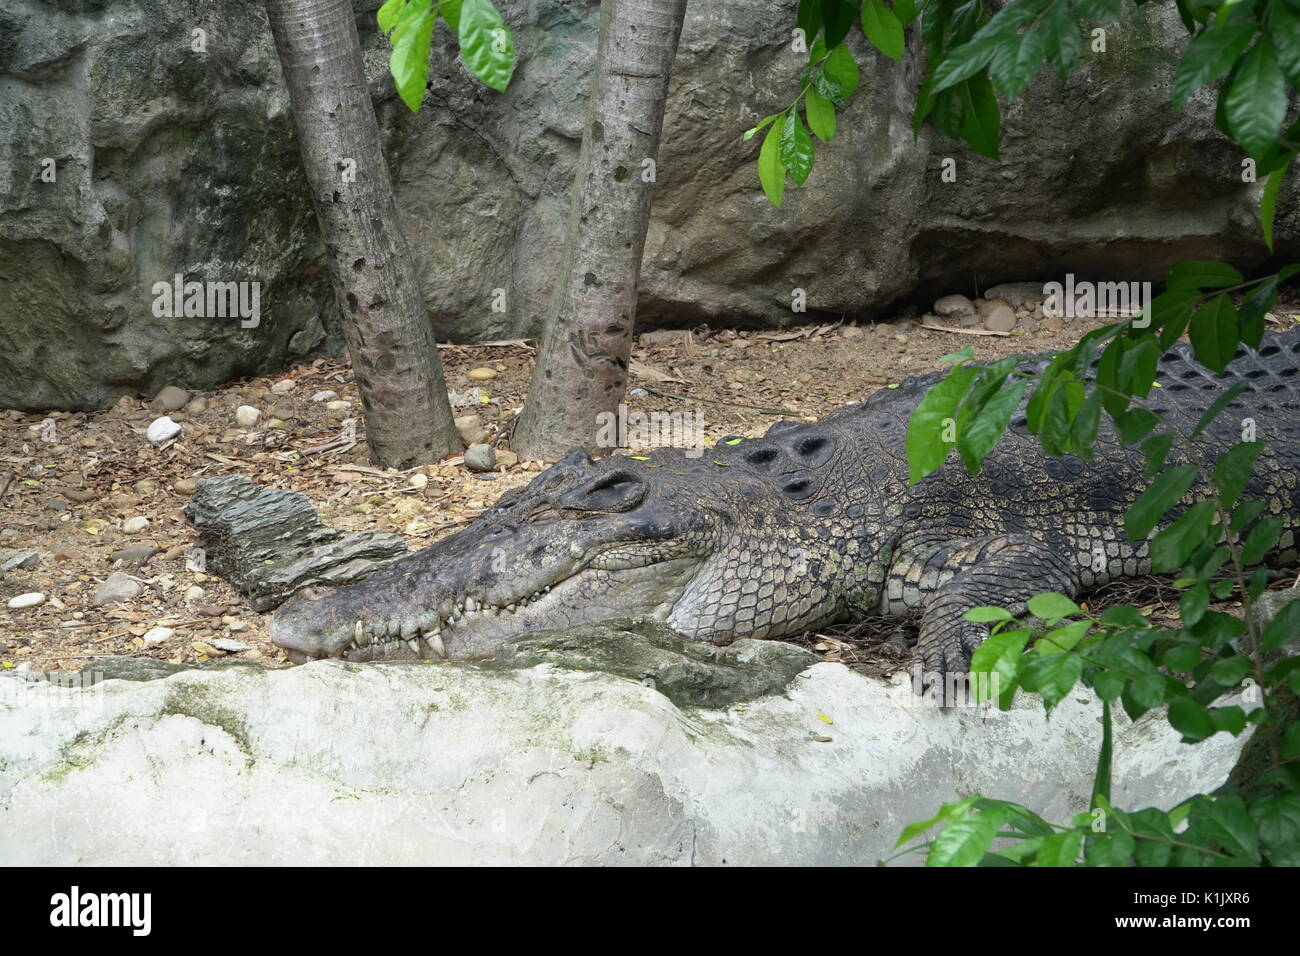 Image of a crocodile sleeping and resting in a zoo Stock Photo